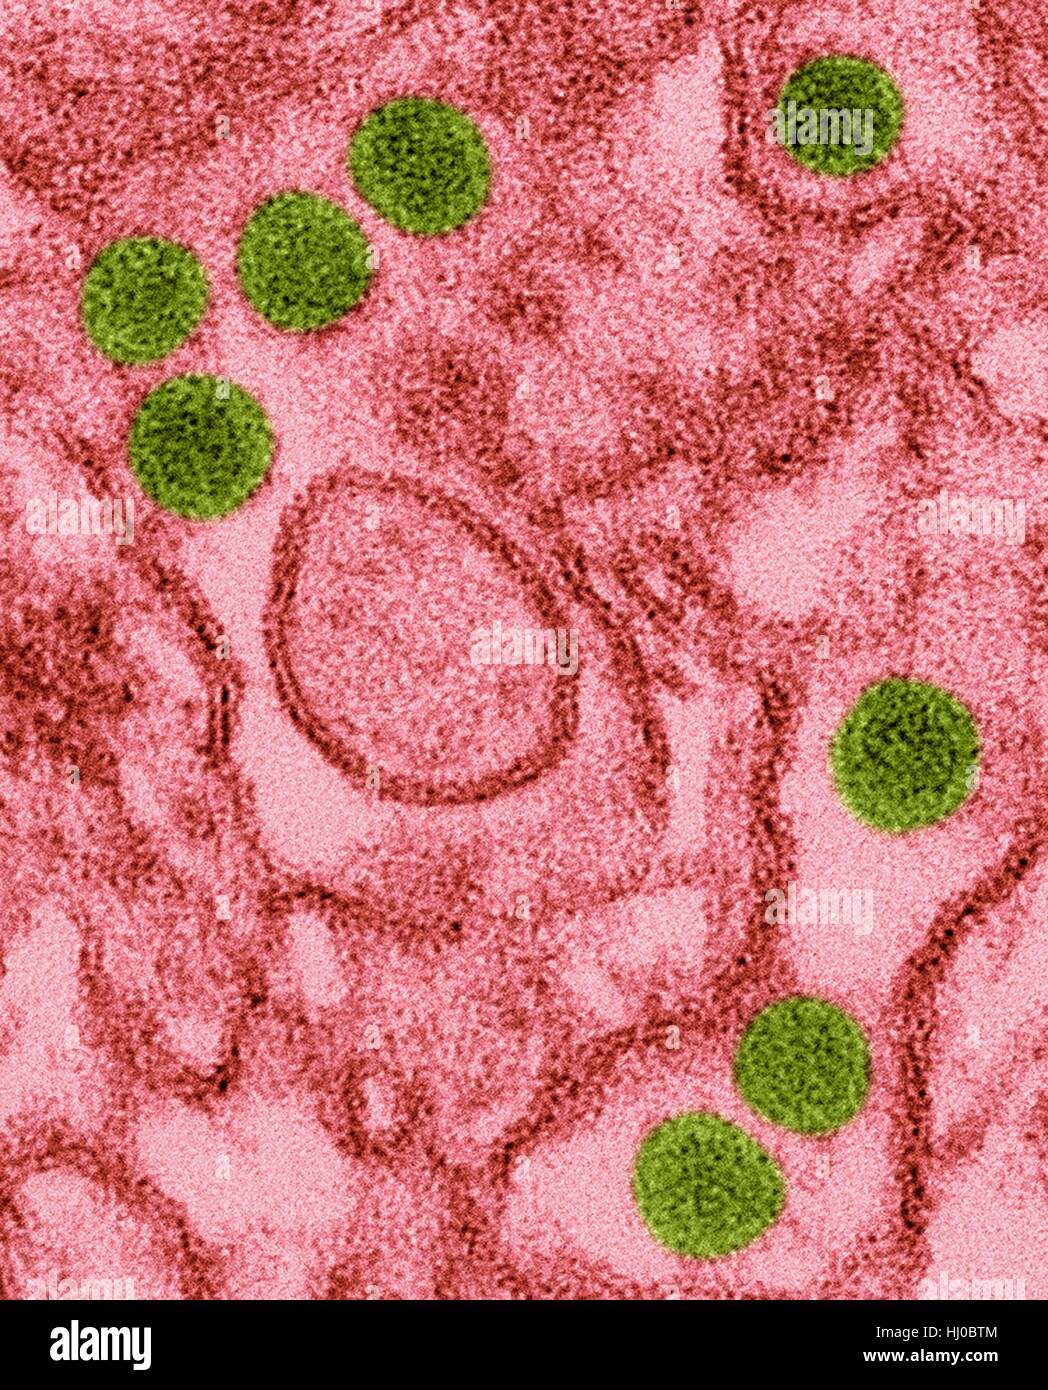 Coloured transmission electron micrograph (TEM) of Zika virus particles (green) isolated in kidney epithelial cells (Vero E6 cells).Zika viruses have dense core surrounded by envelope (40nm size).Zika virus is RNA (ribonucleic acid) virus in family Flaviviridae causes Zika fever,or Zika Stock Photo